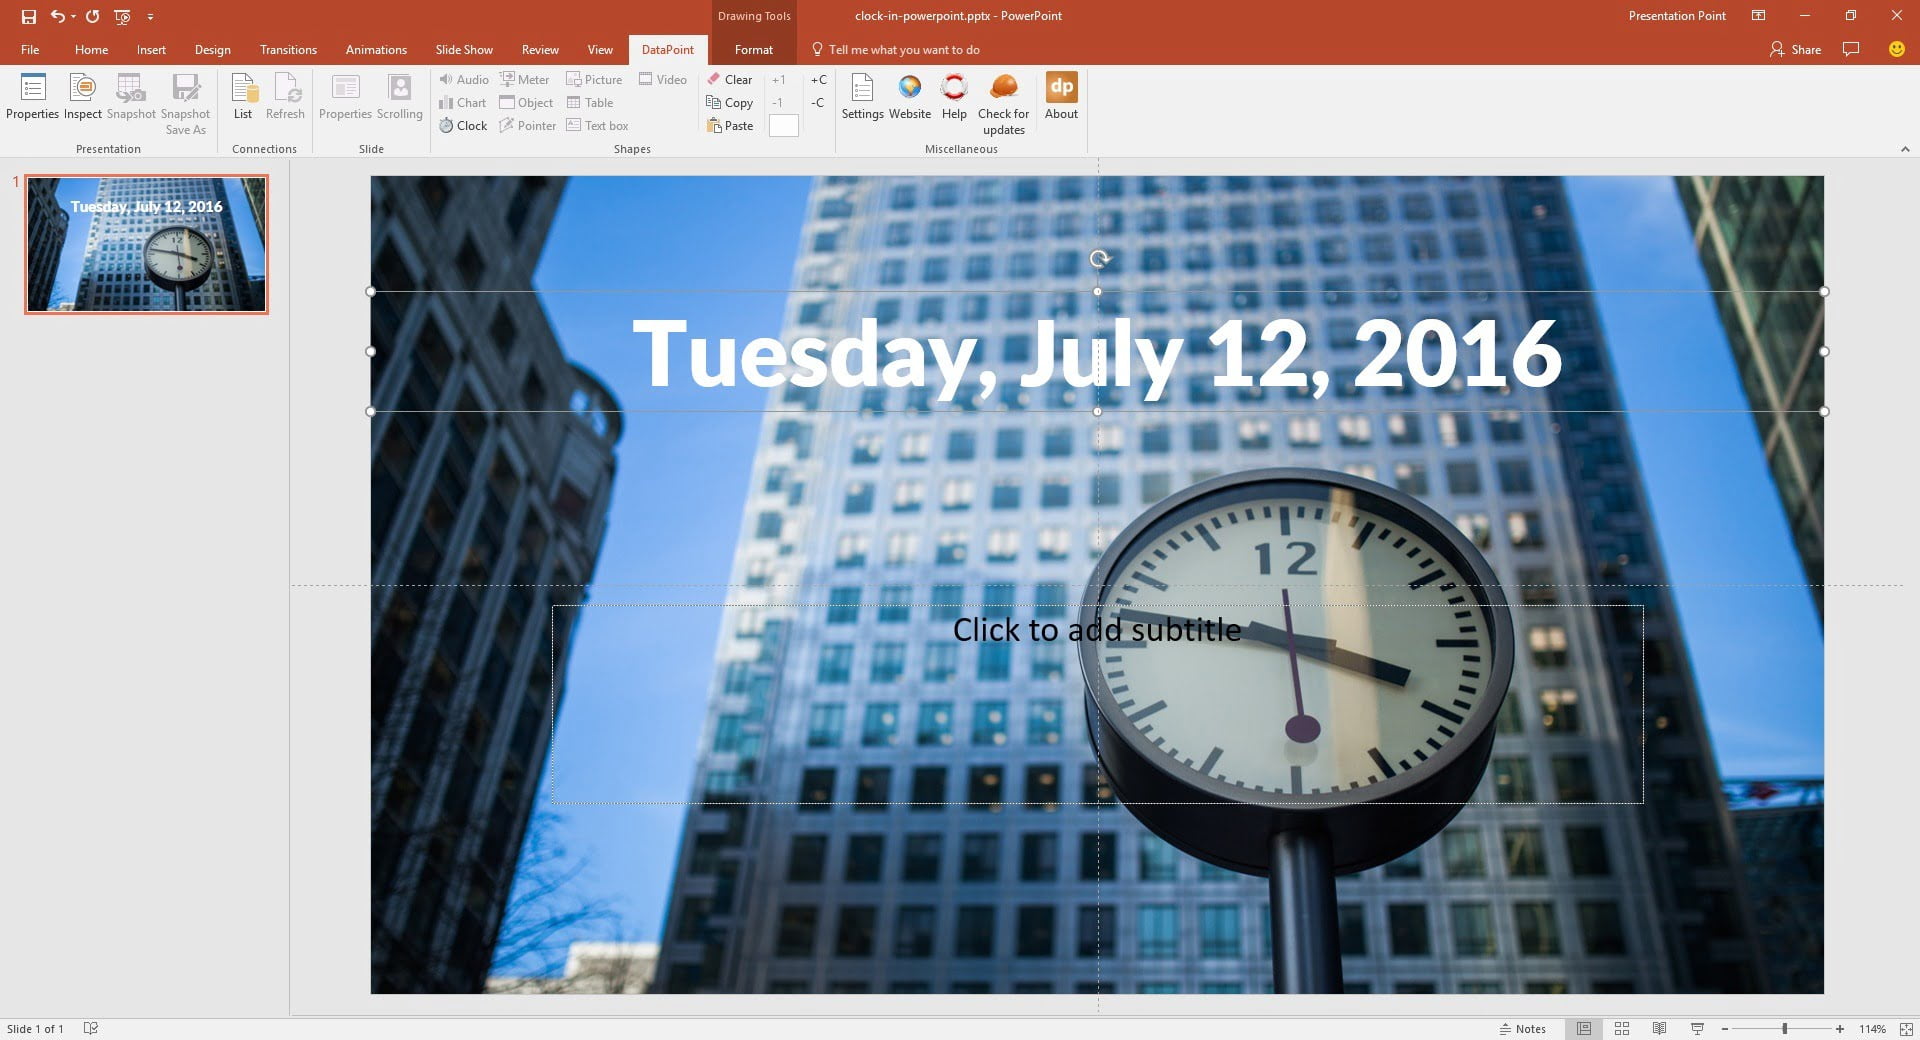 live date on powerpoint slide